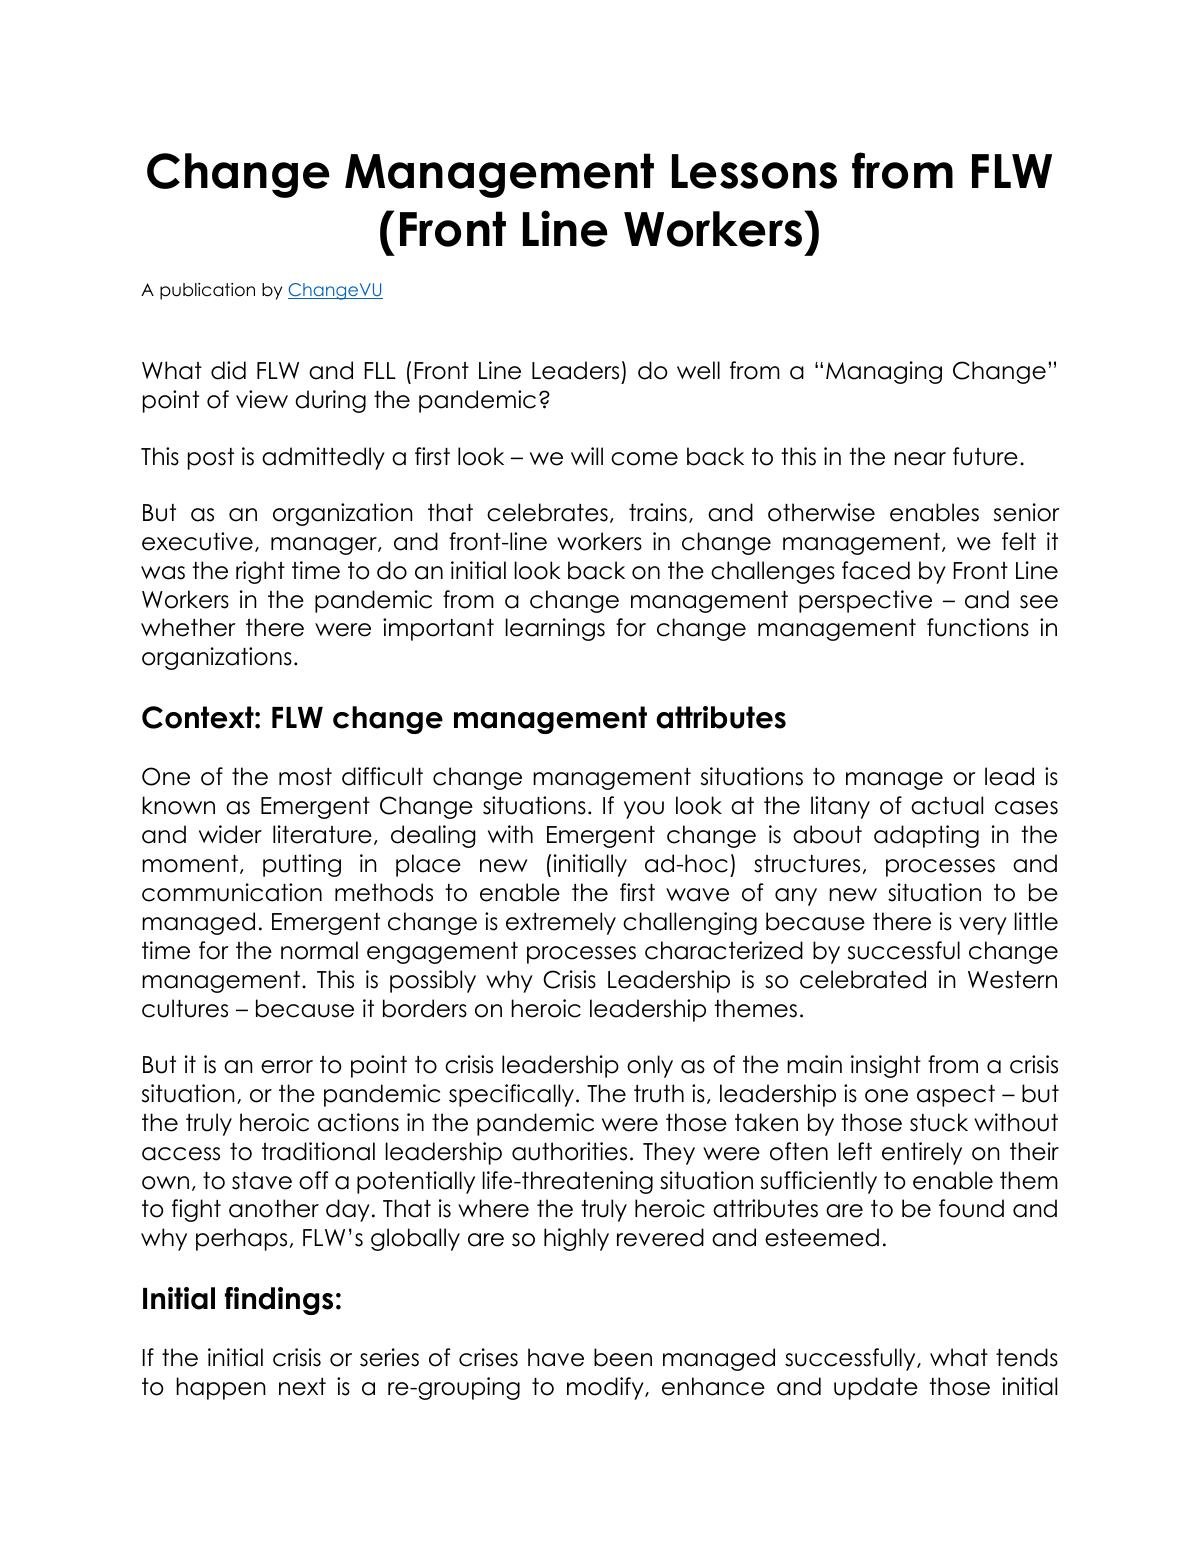 Change Management Lessons from FLW (Front Line Workers)